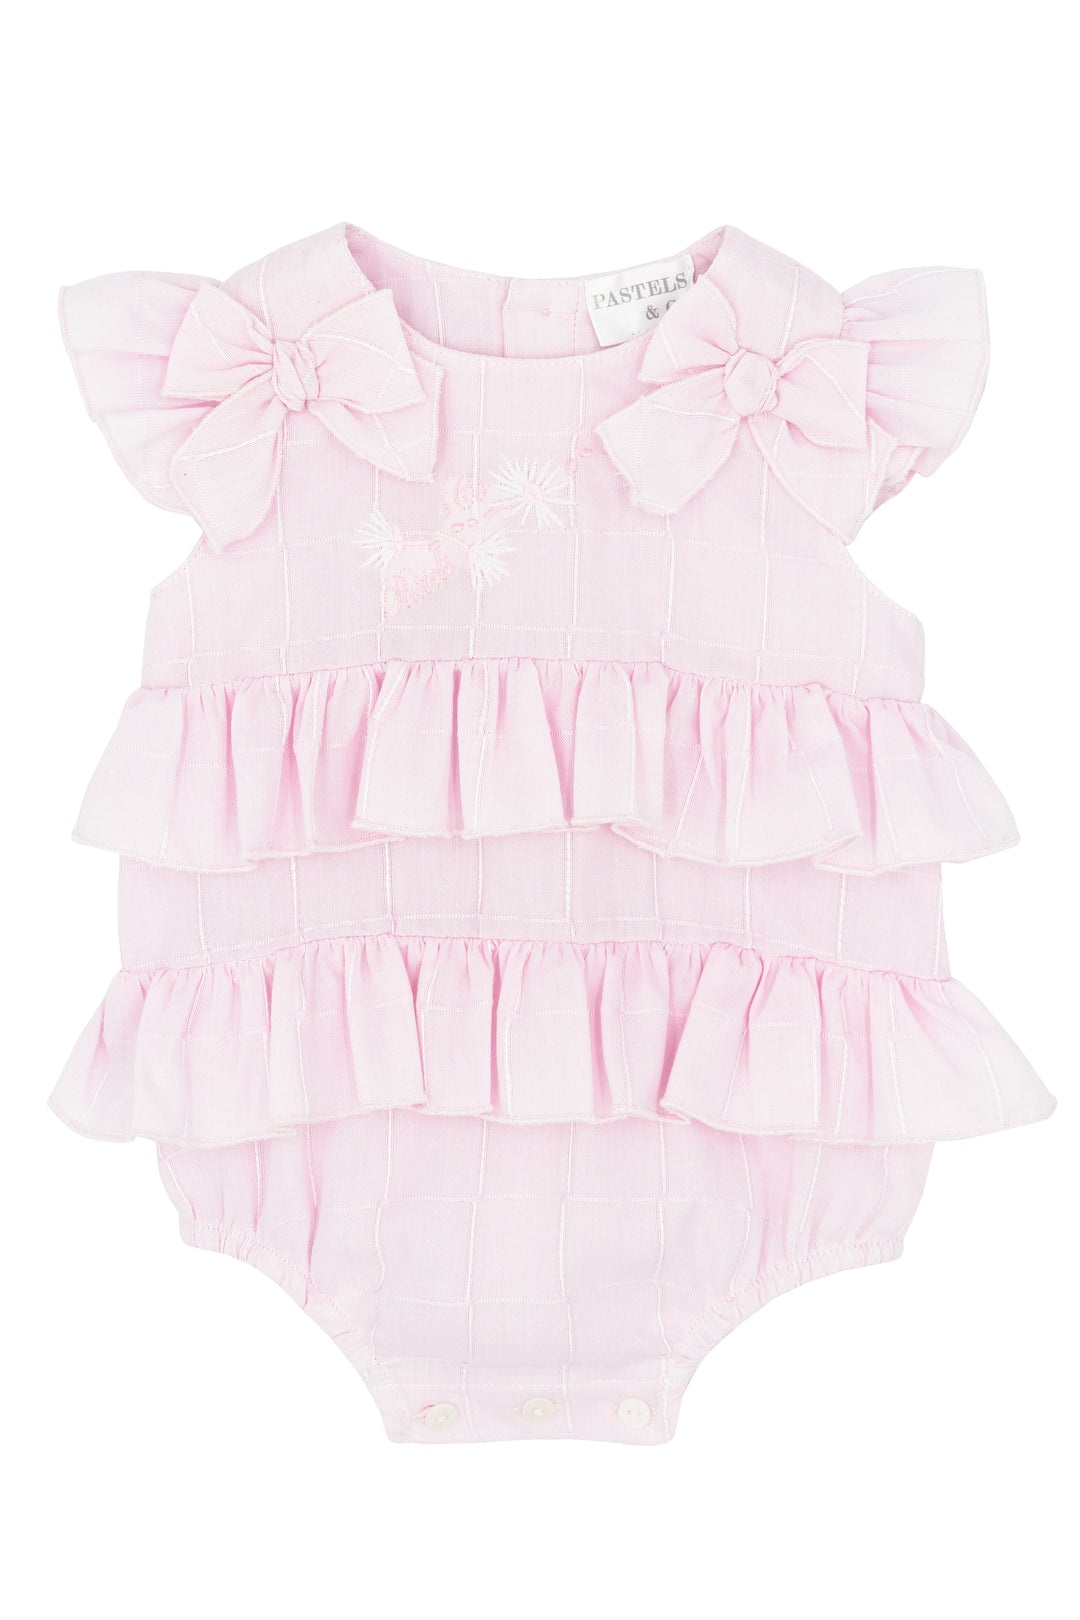 Pastels & Co "Callie" Pink Frilled Shortie | Millie and John